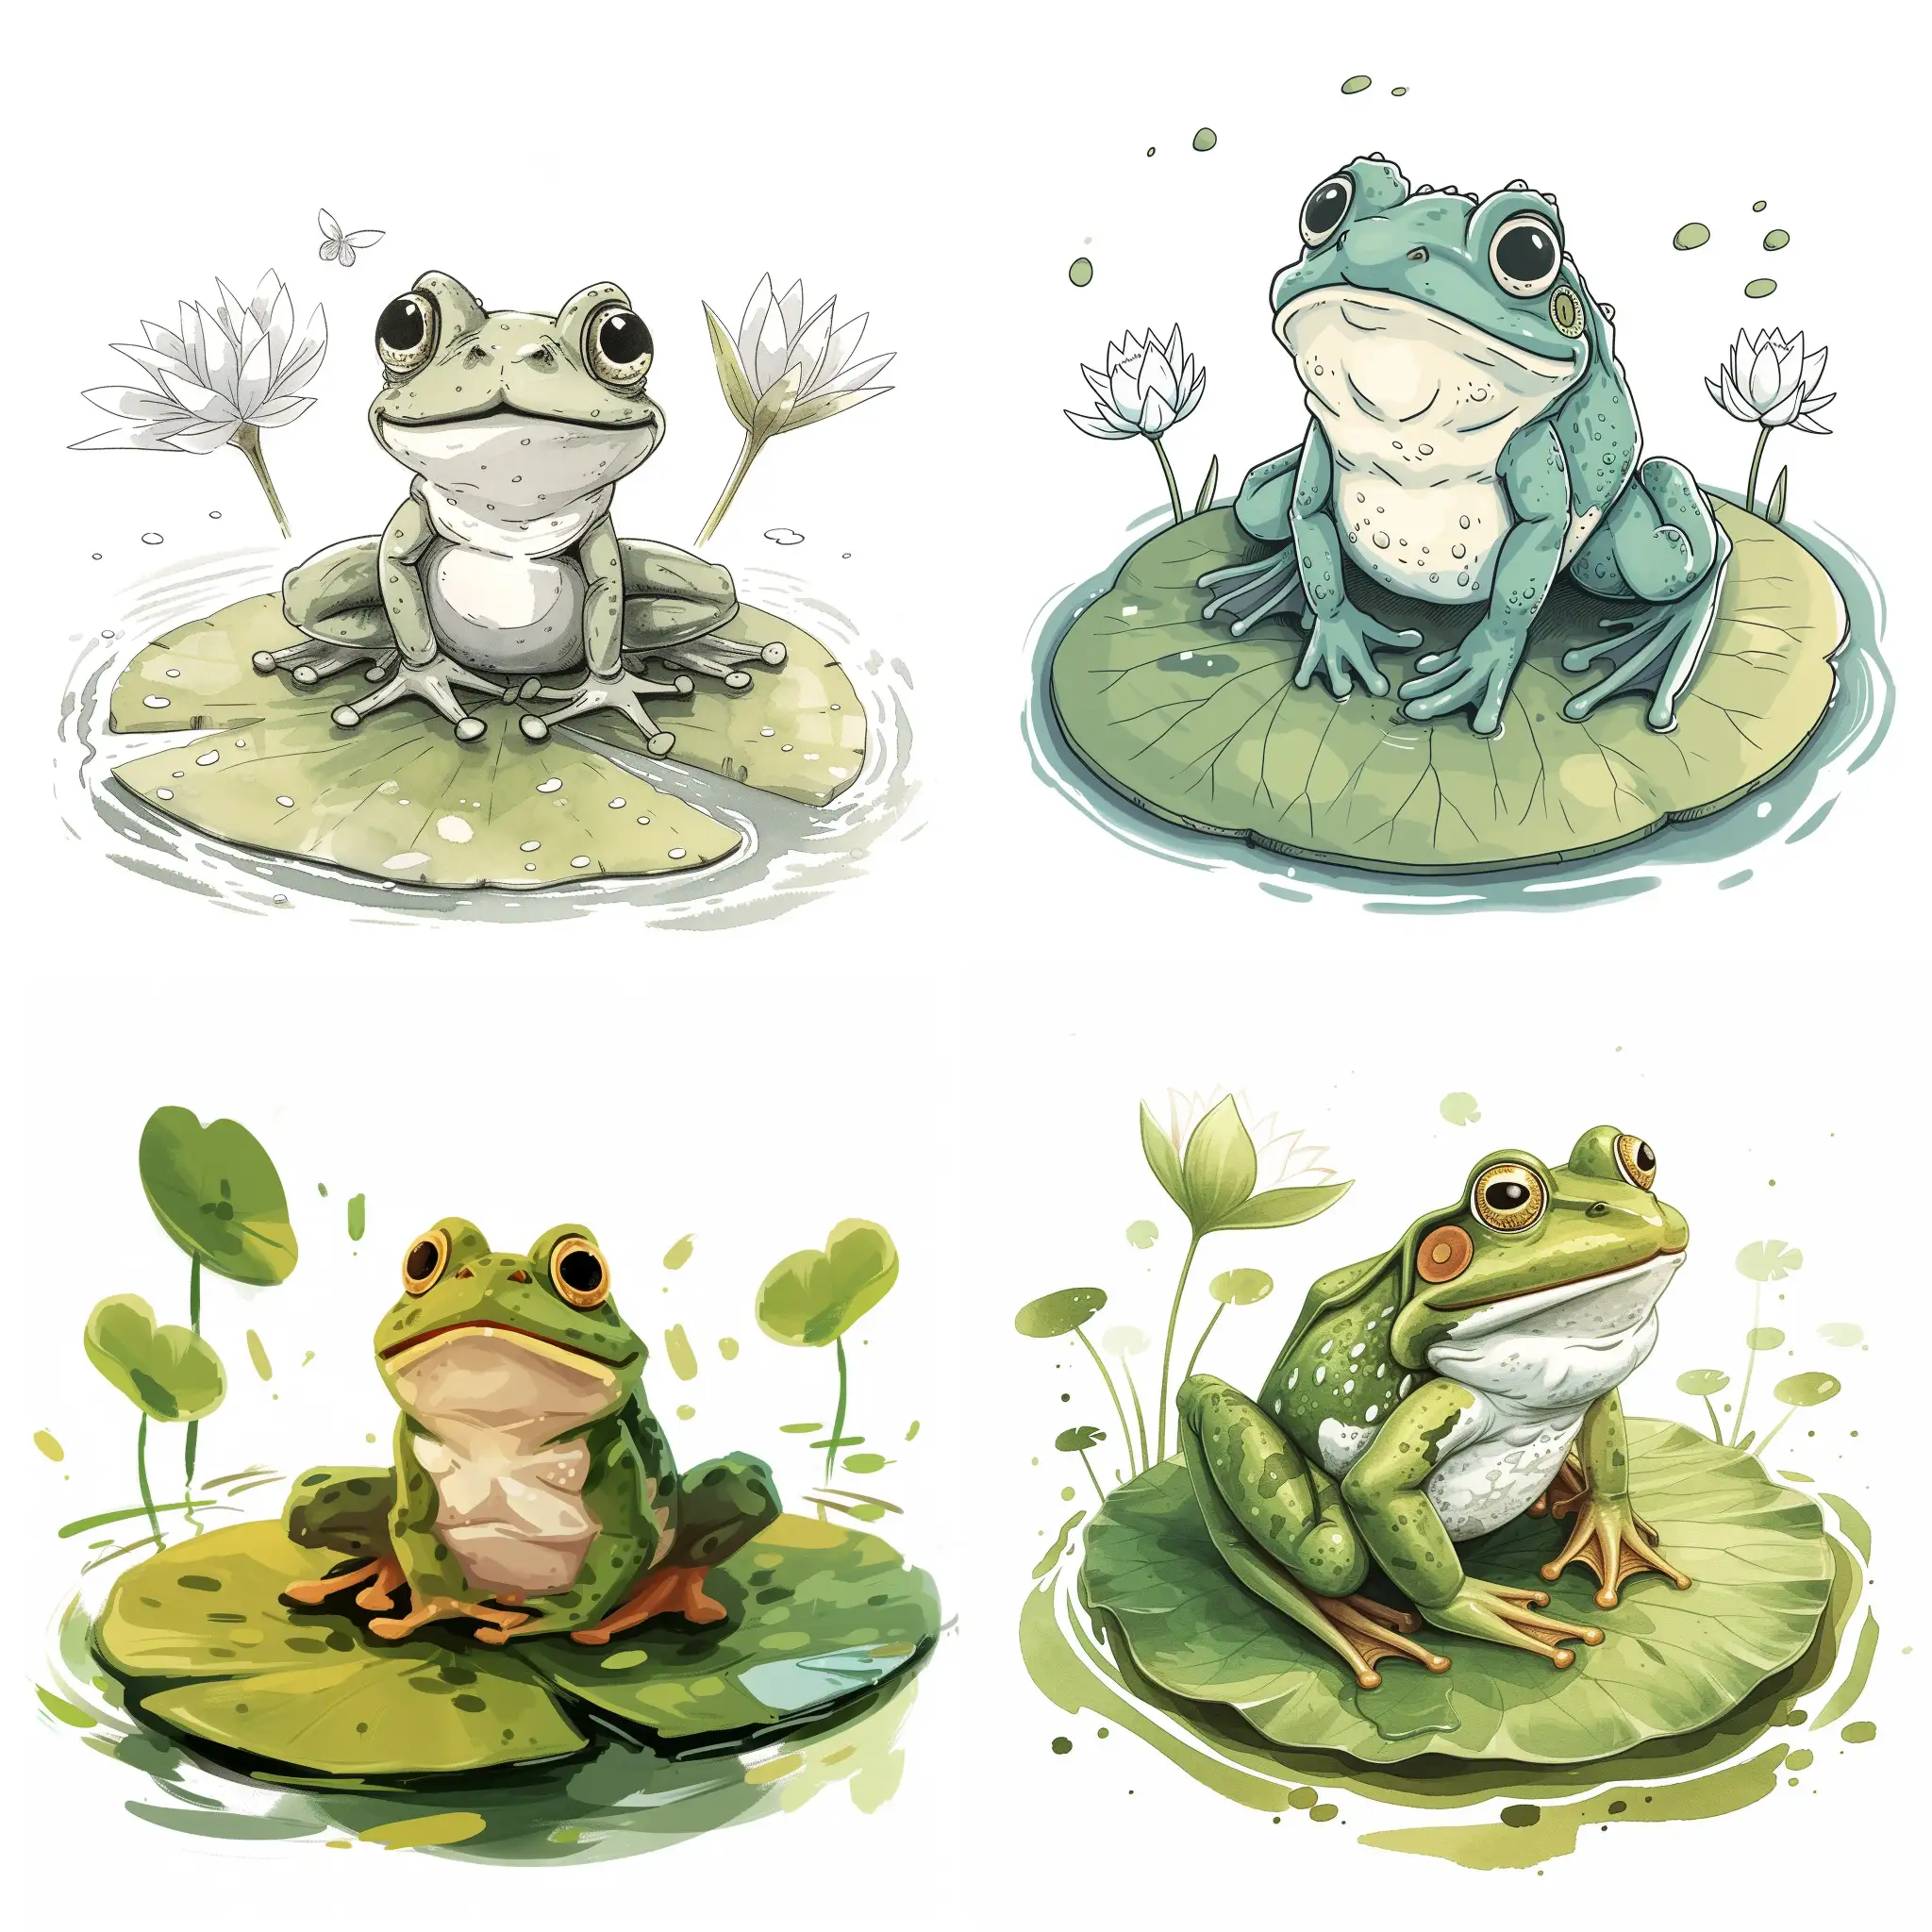 Chubby-Funky-Frog-on-Lily-Pad-Colorful-PixarInspired-Detailed-Ink-Illustration